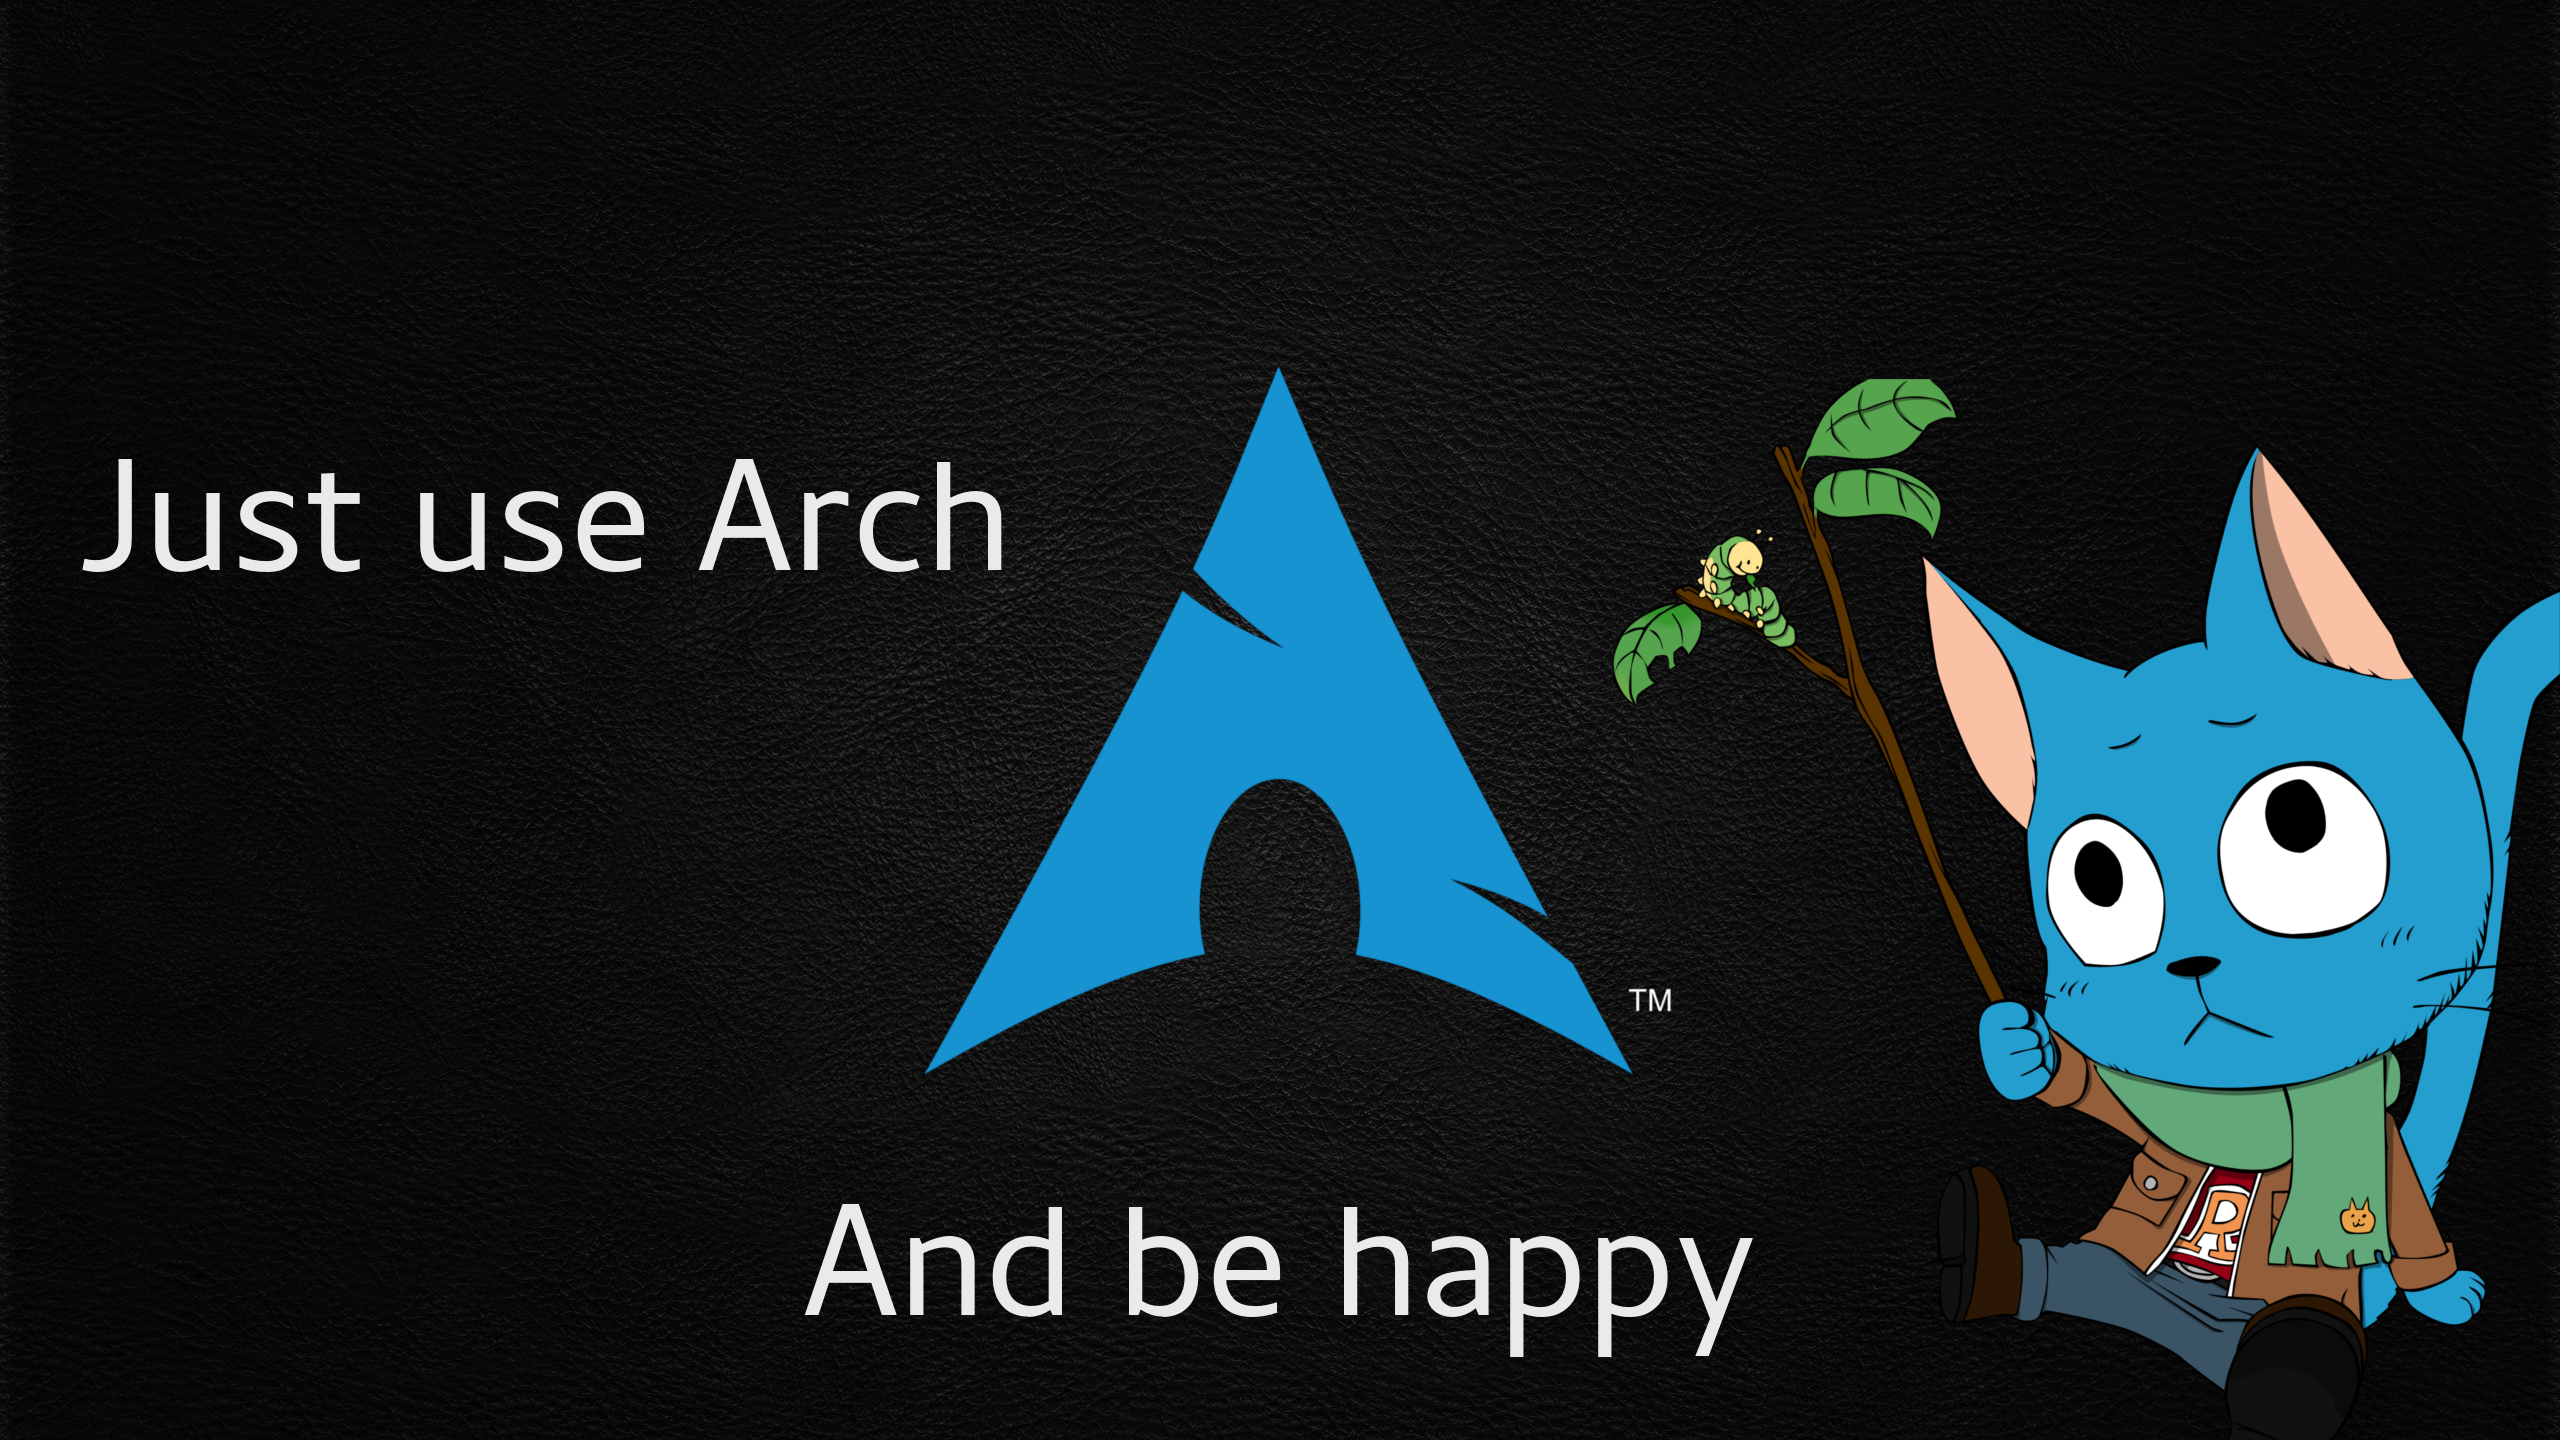 General 2560x1440 Arch Linux black background simple background logo operating system